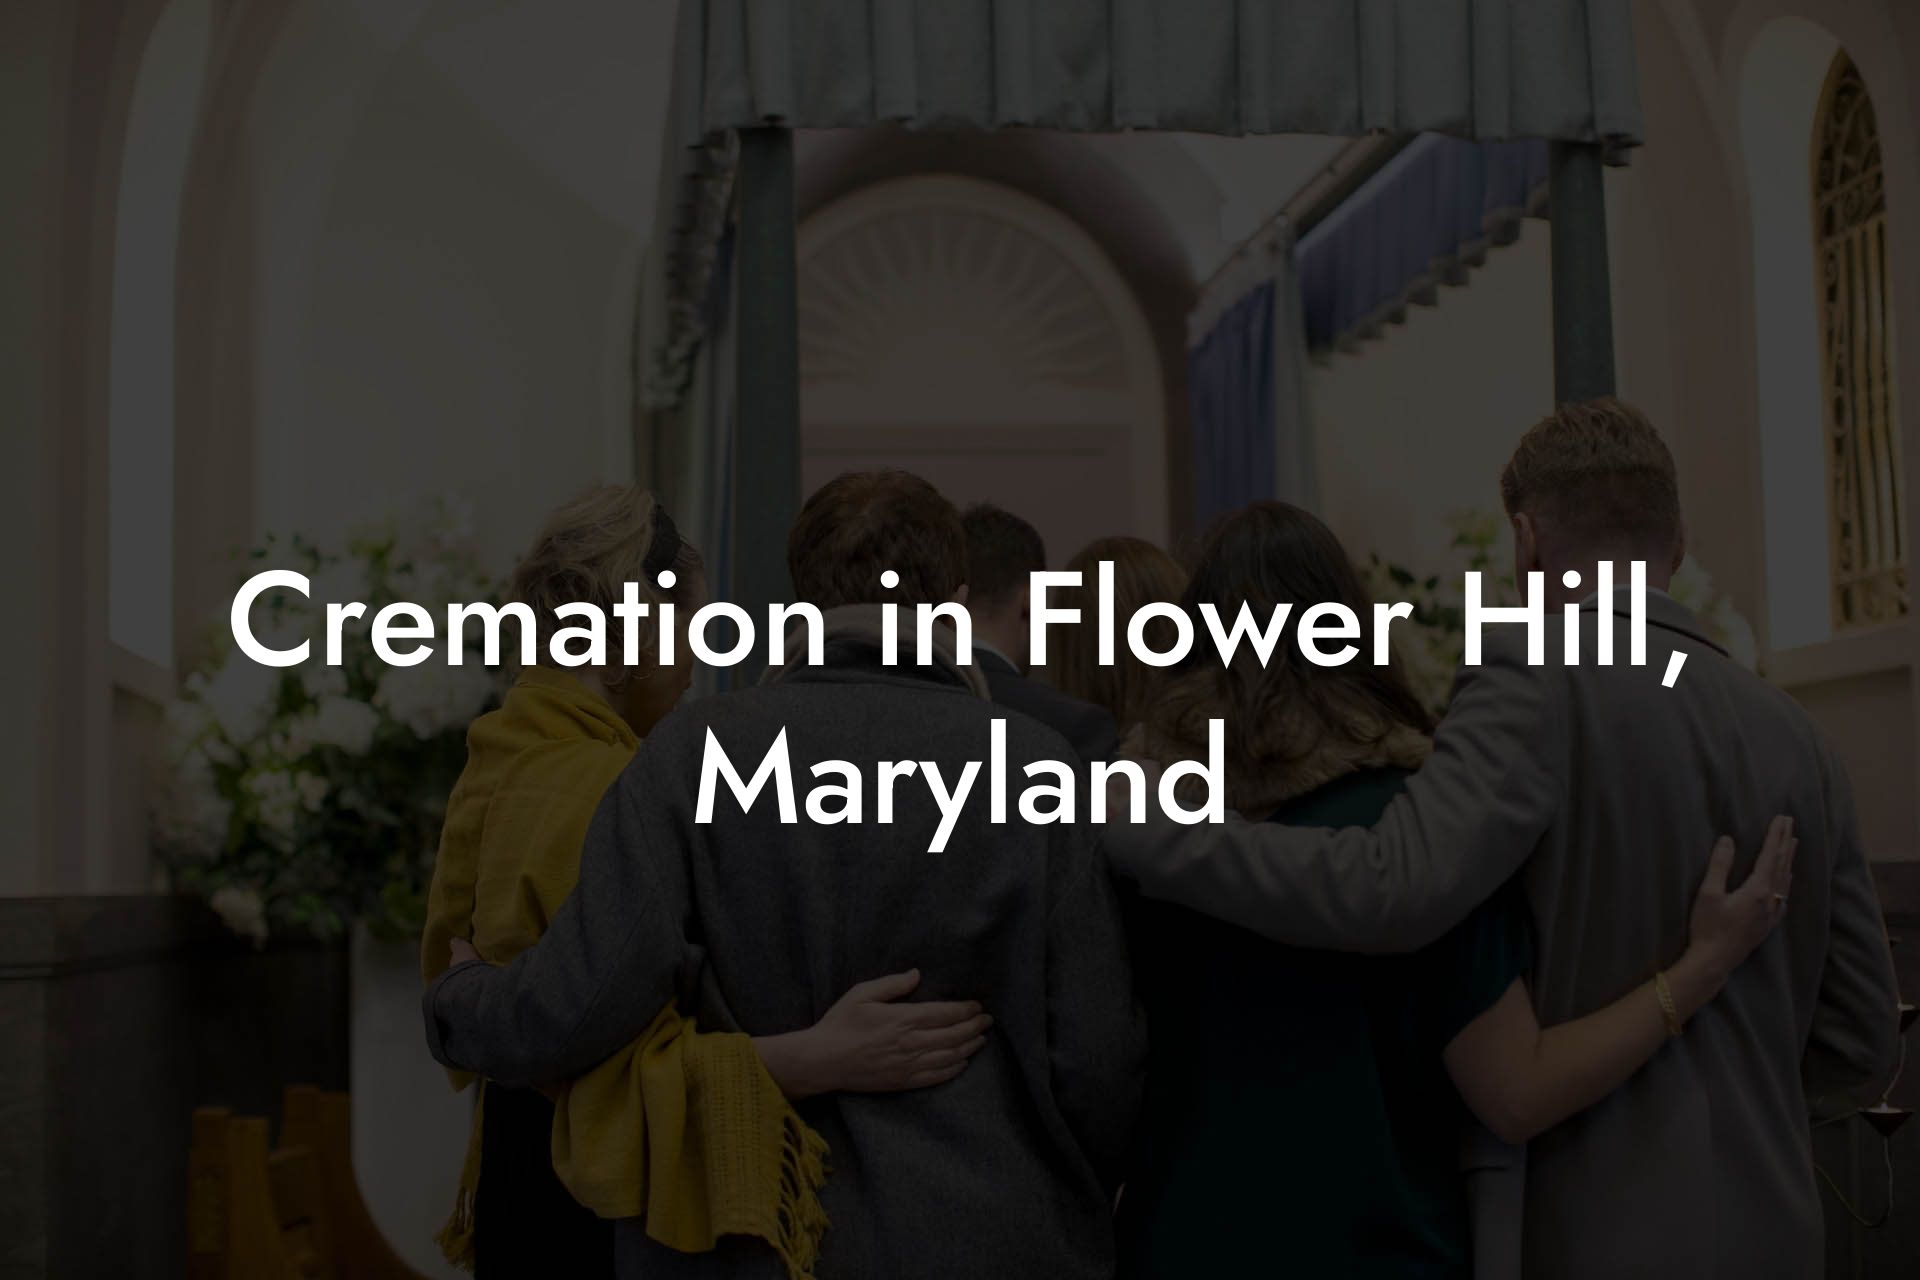 Cremation in Flower Hill, Maryland